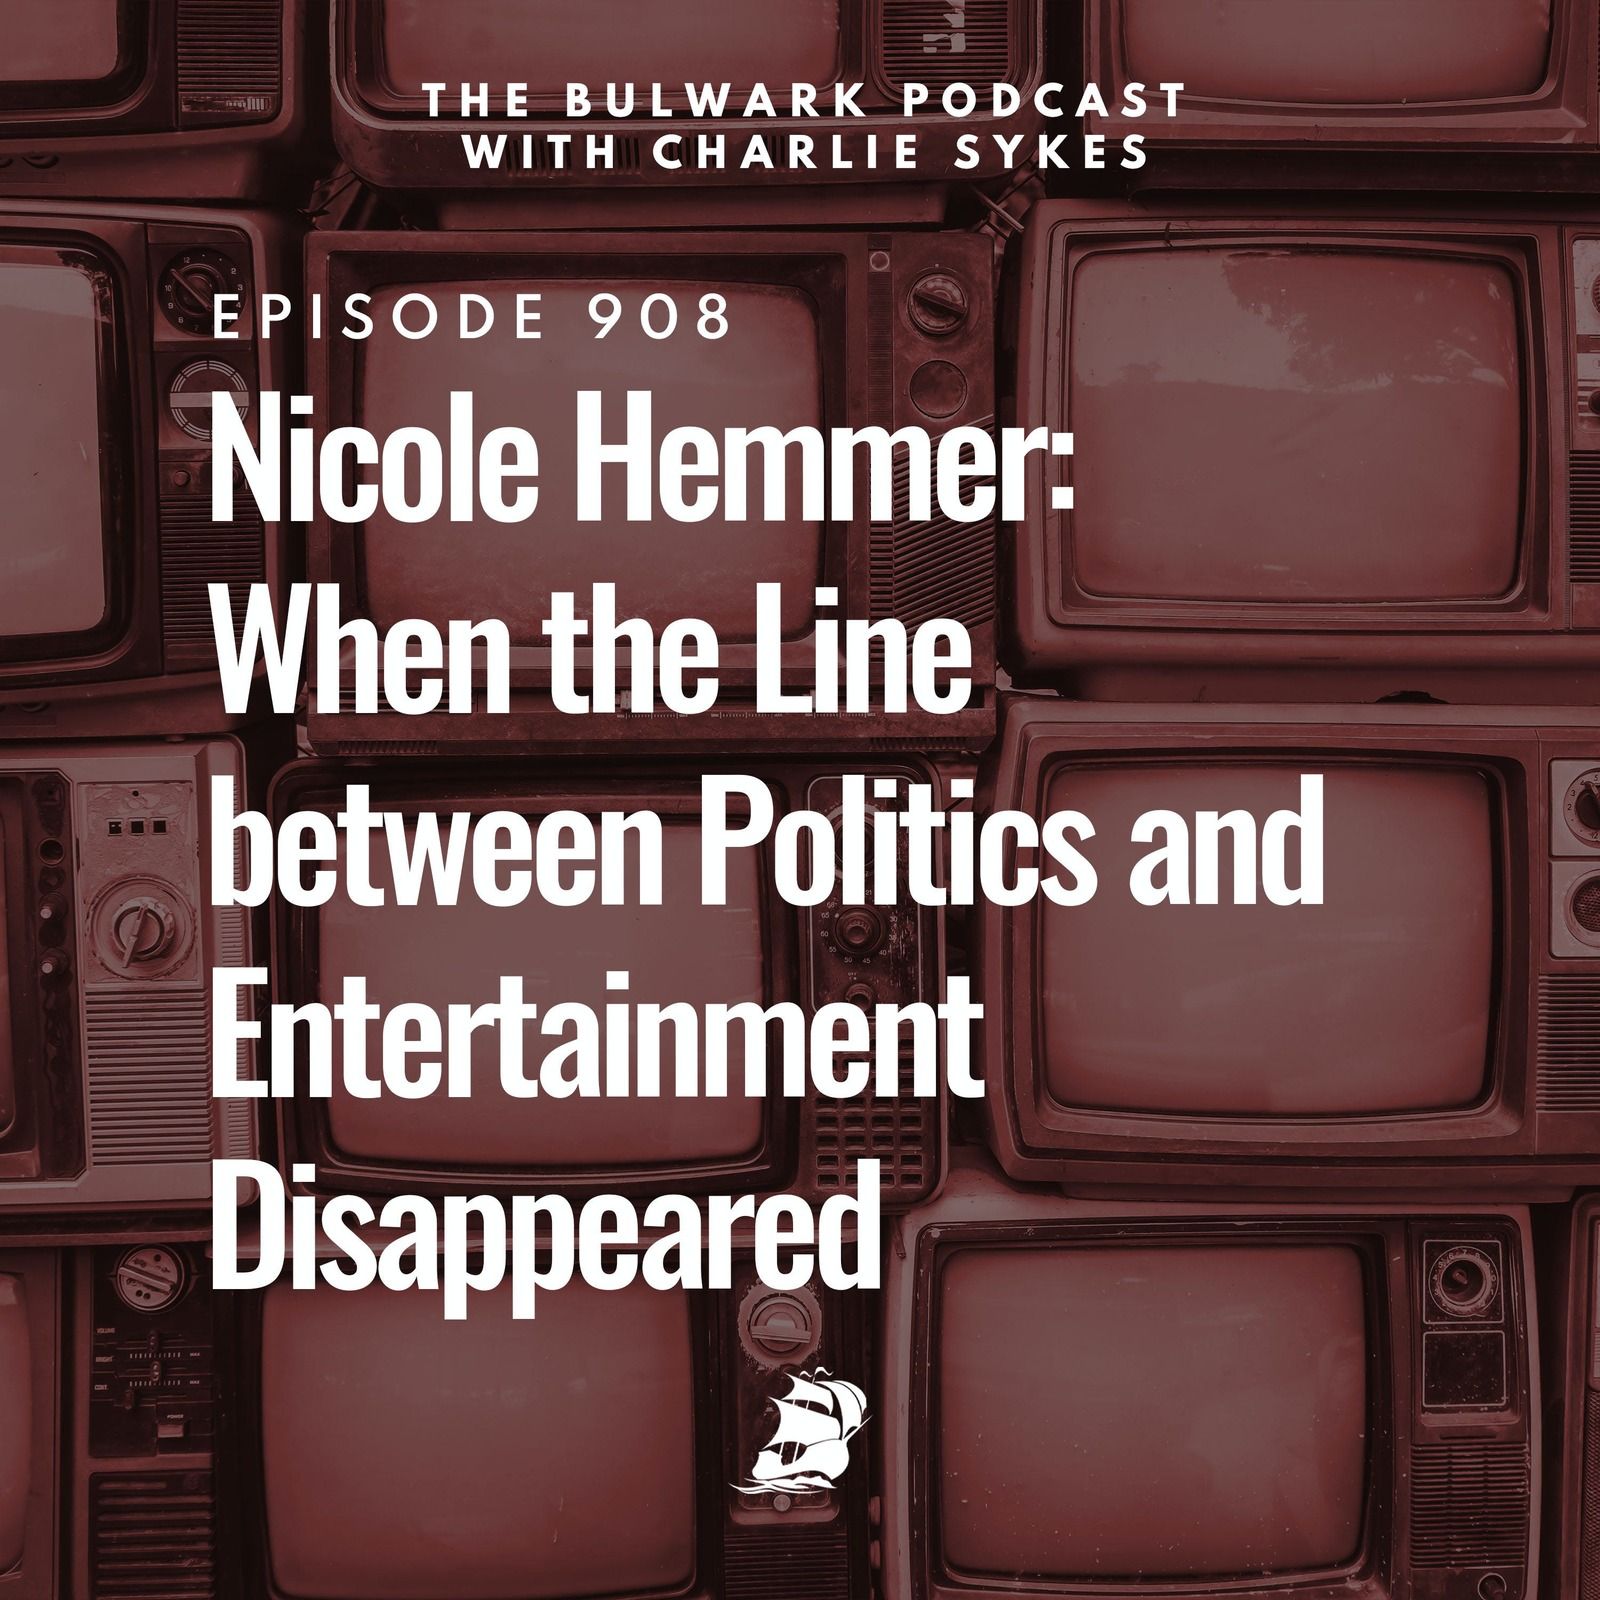 Nicole Hemmer: When the Line between Politics and Entertainment Disappeared by The Bulwark Podcast